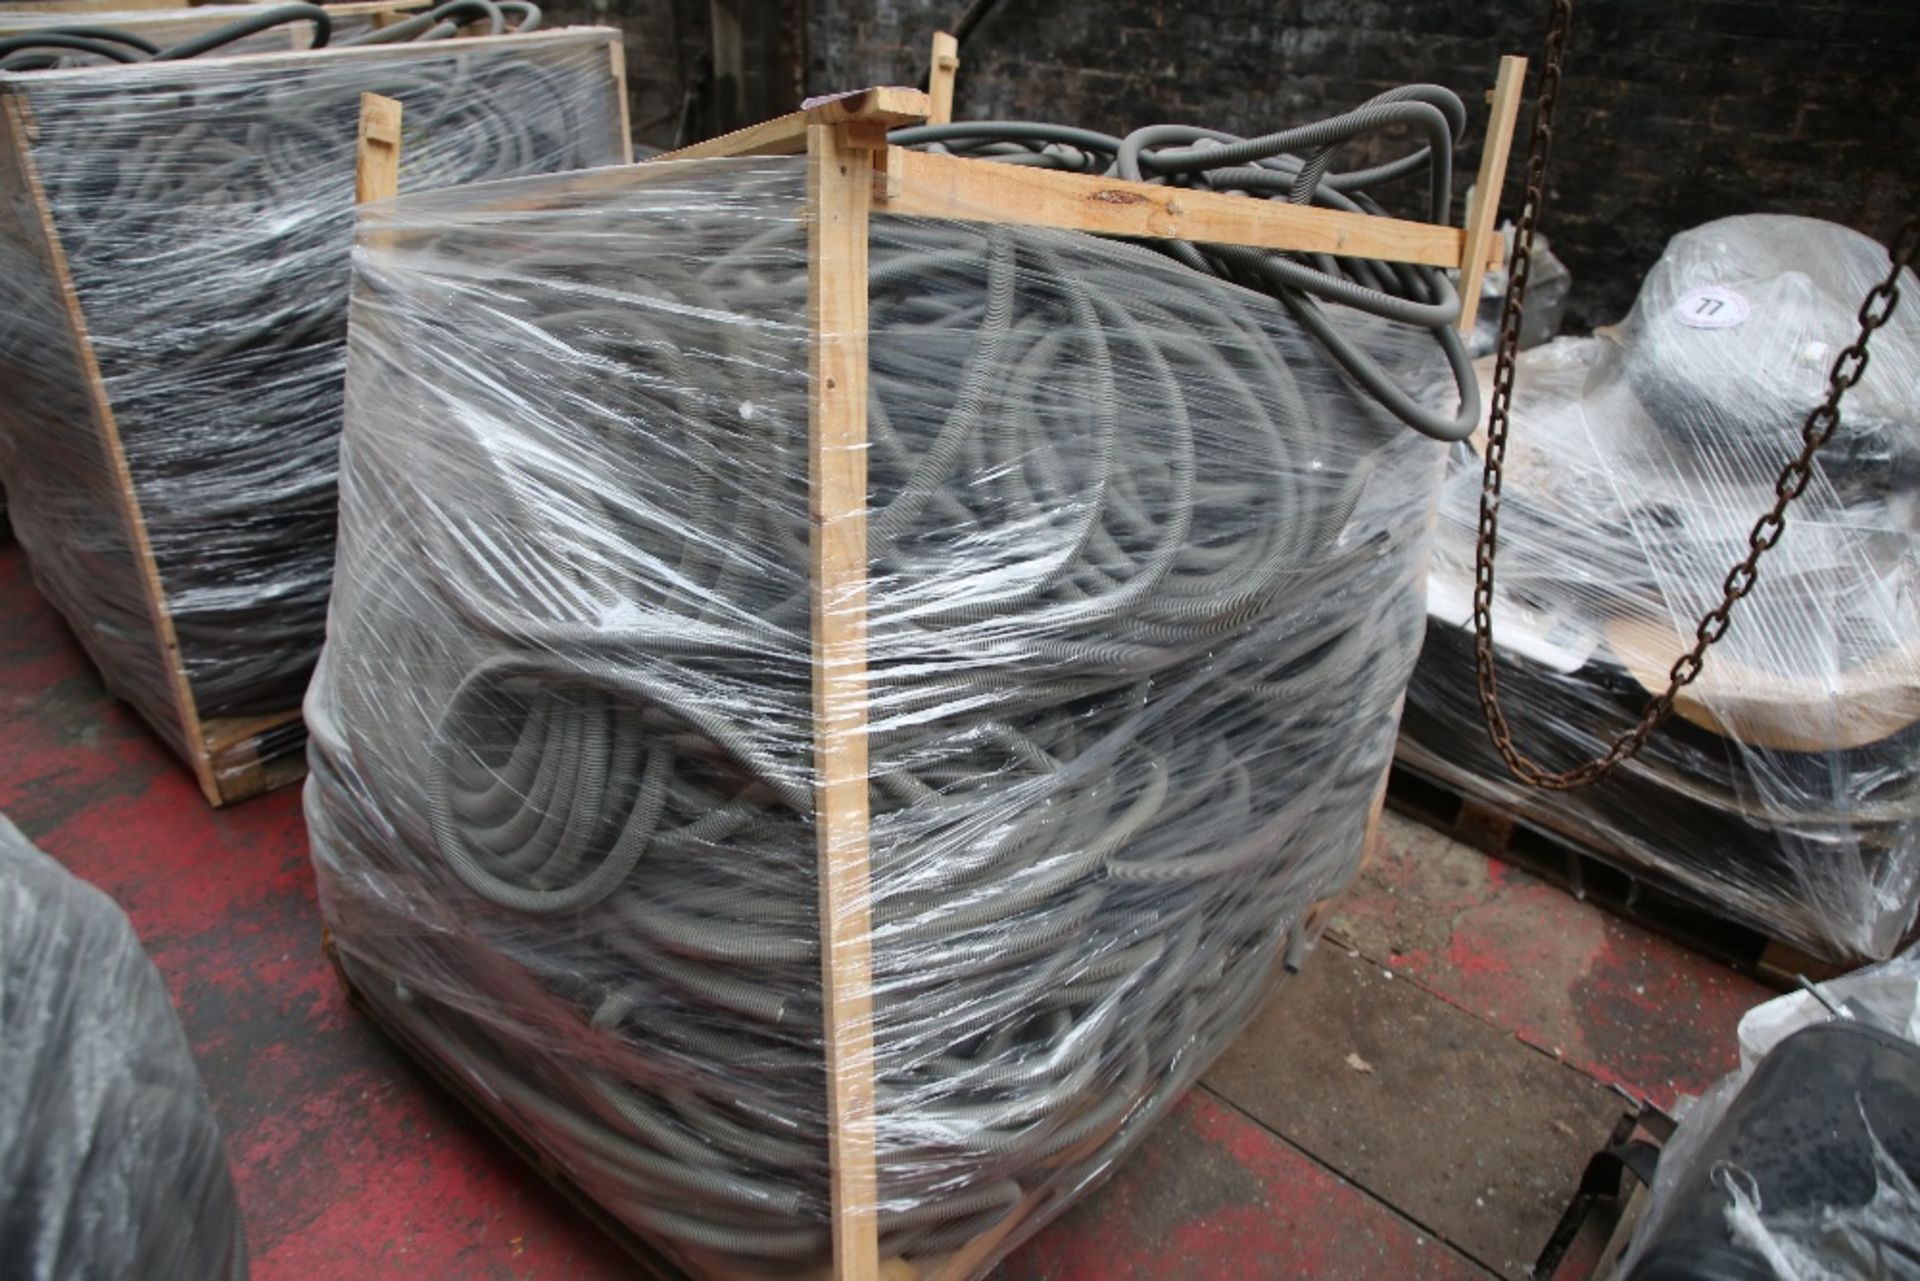 Plastic Cable Ducting / Pipe (1 Pallet) - Image 2 of 3